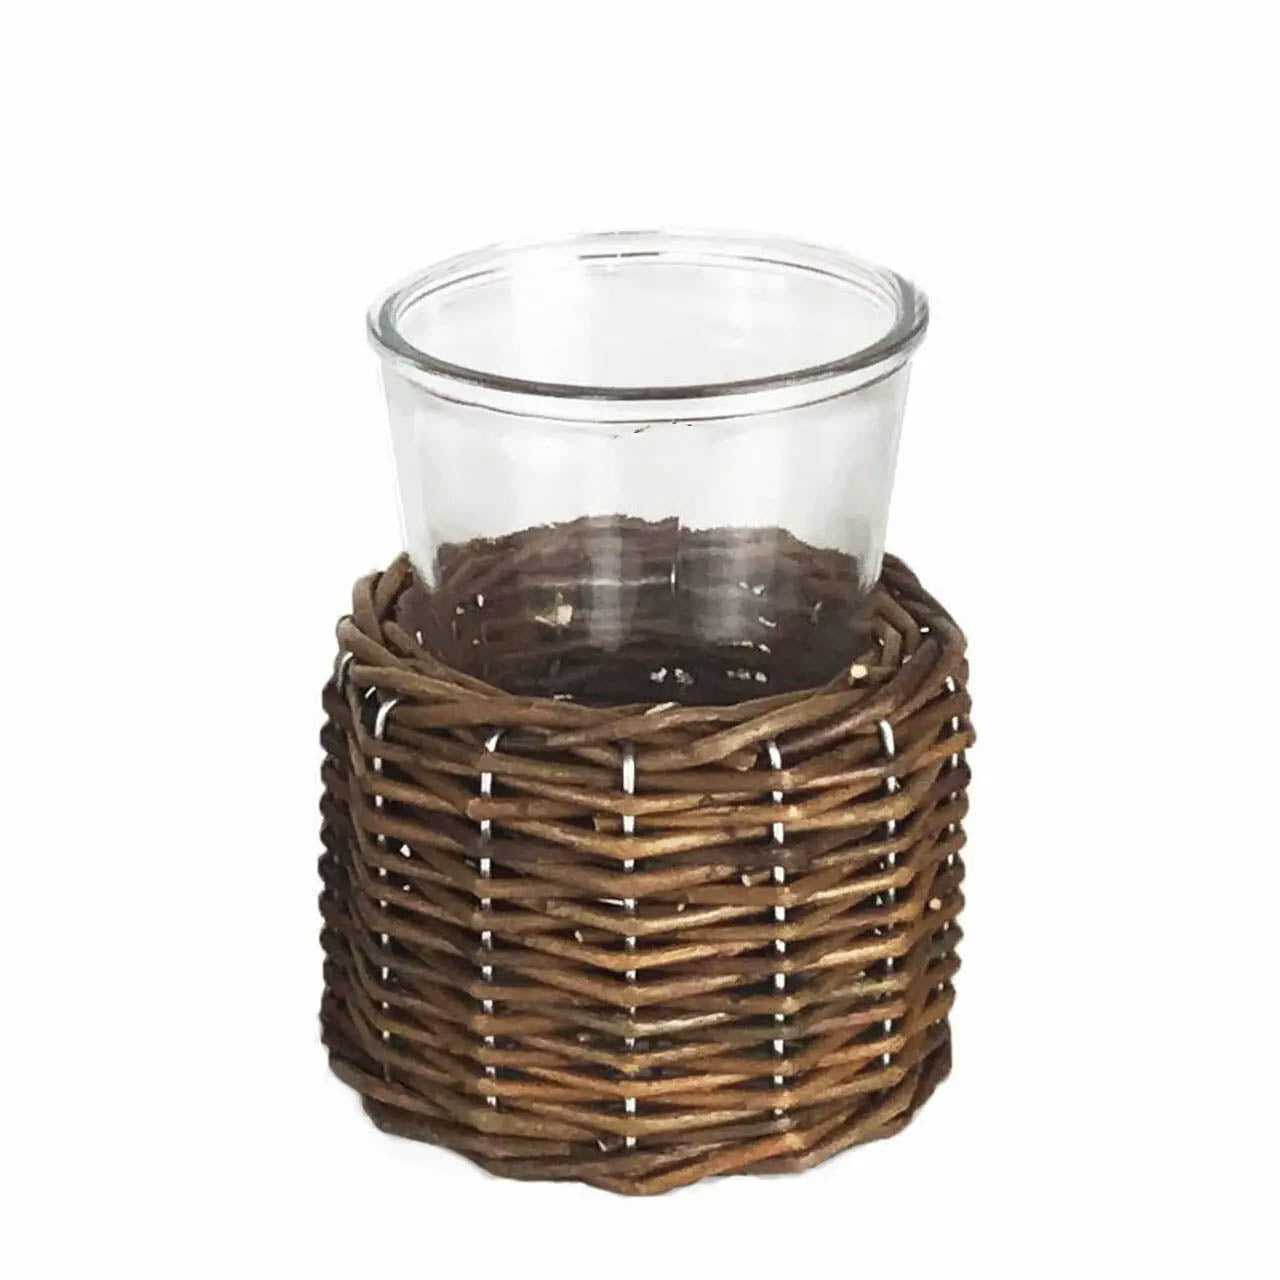 Wholesale willow fishing baskets to Organize and Tidy Up Your Home 